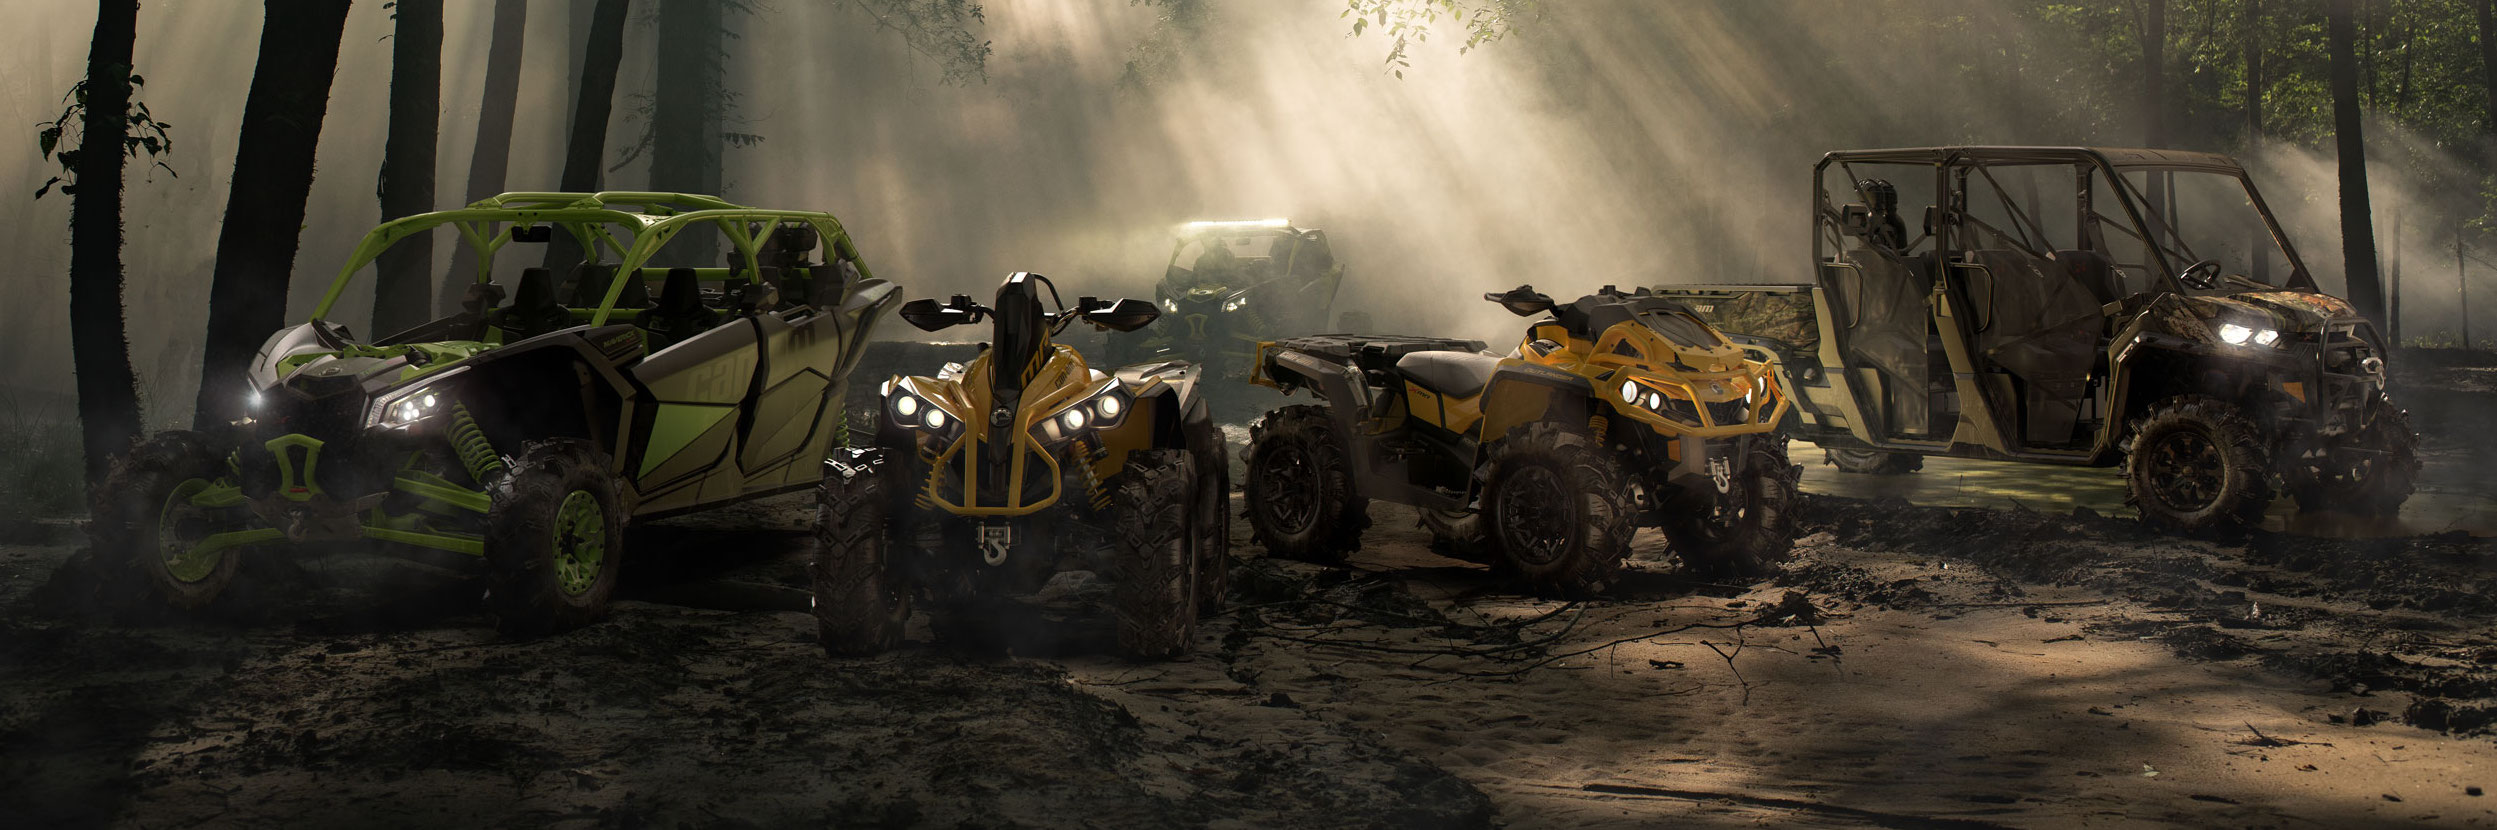 Two Can-Am ATVs and three Can-Am side-by-sides parked in a forest